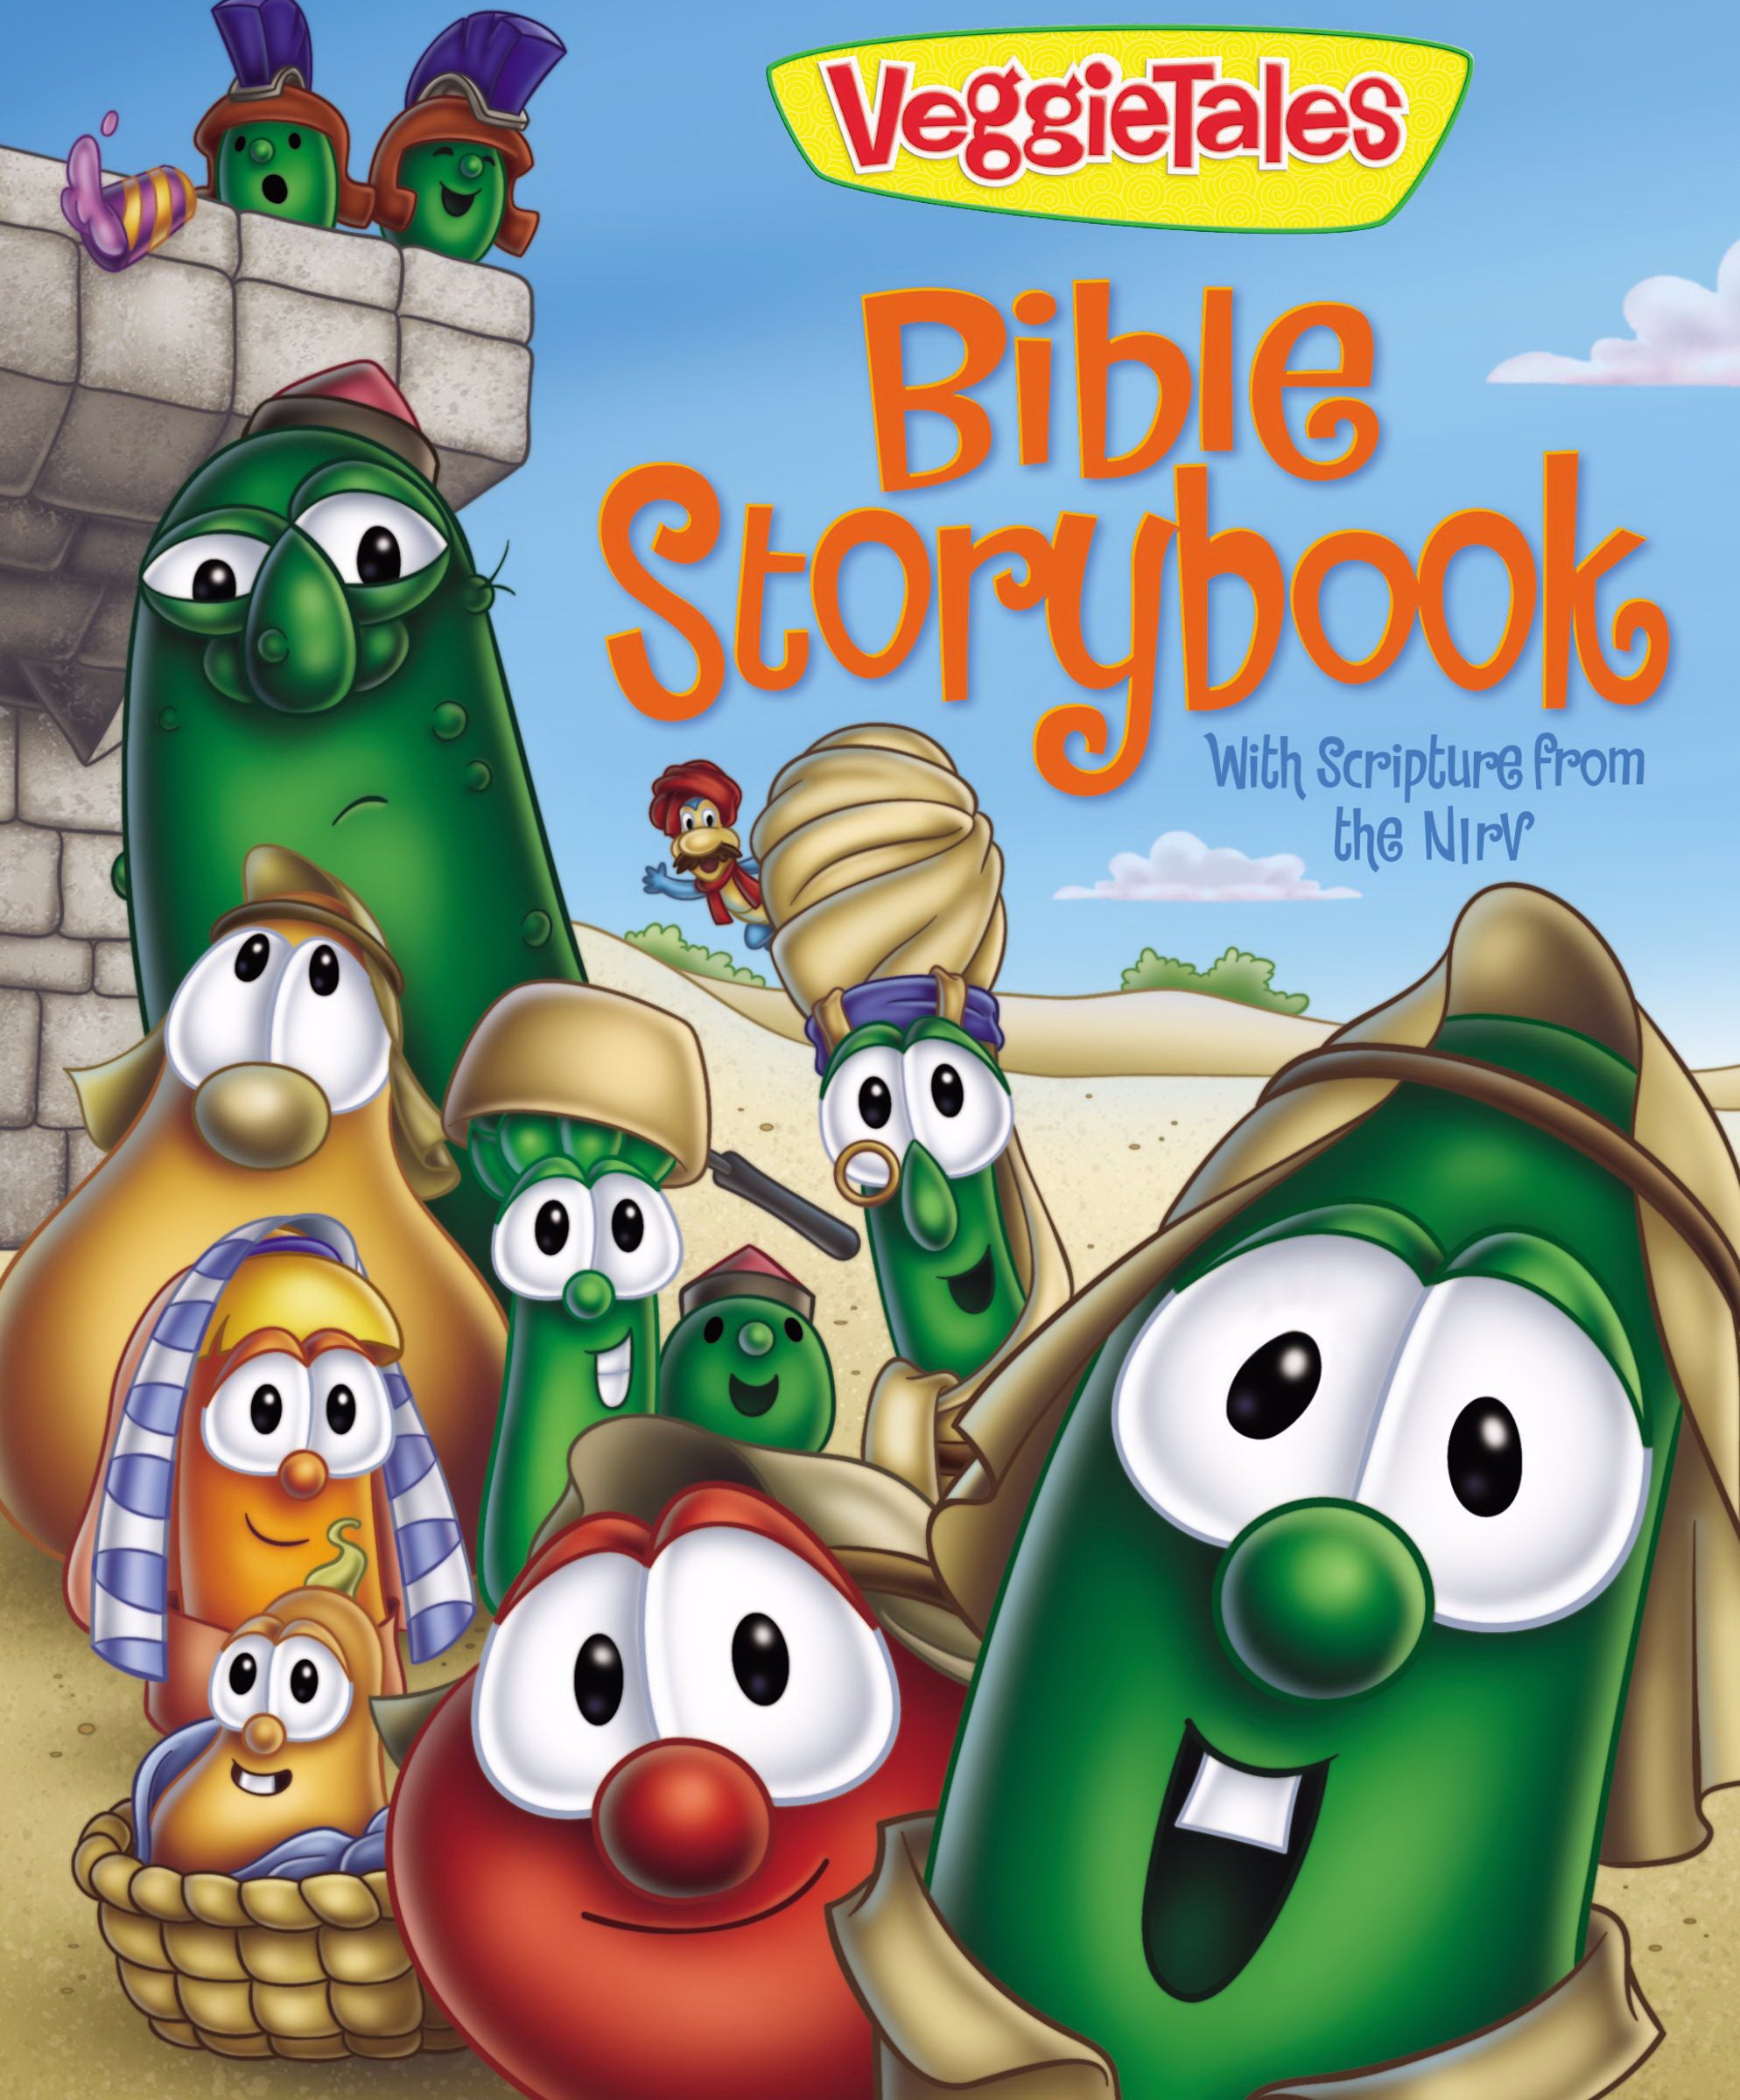 Image of Veggie Tales Bible Storybook other